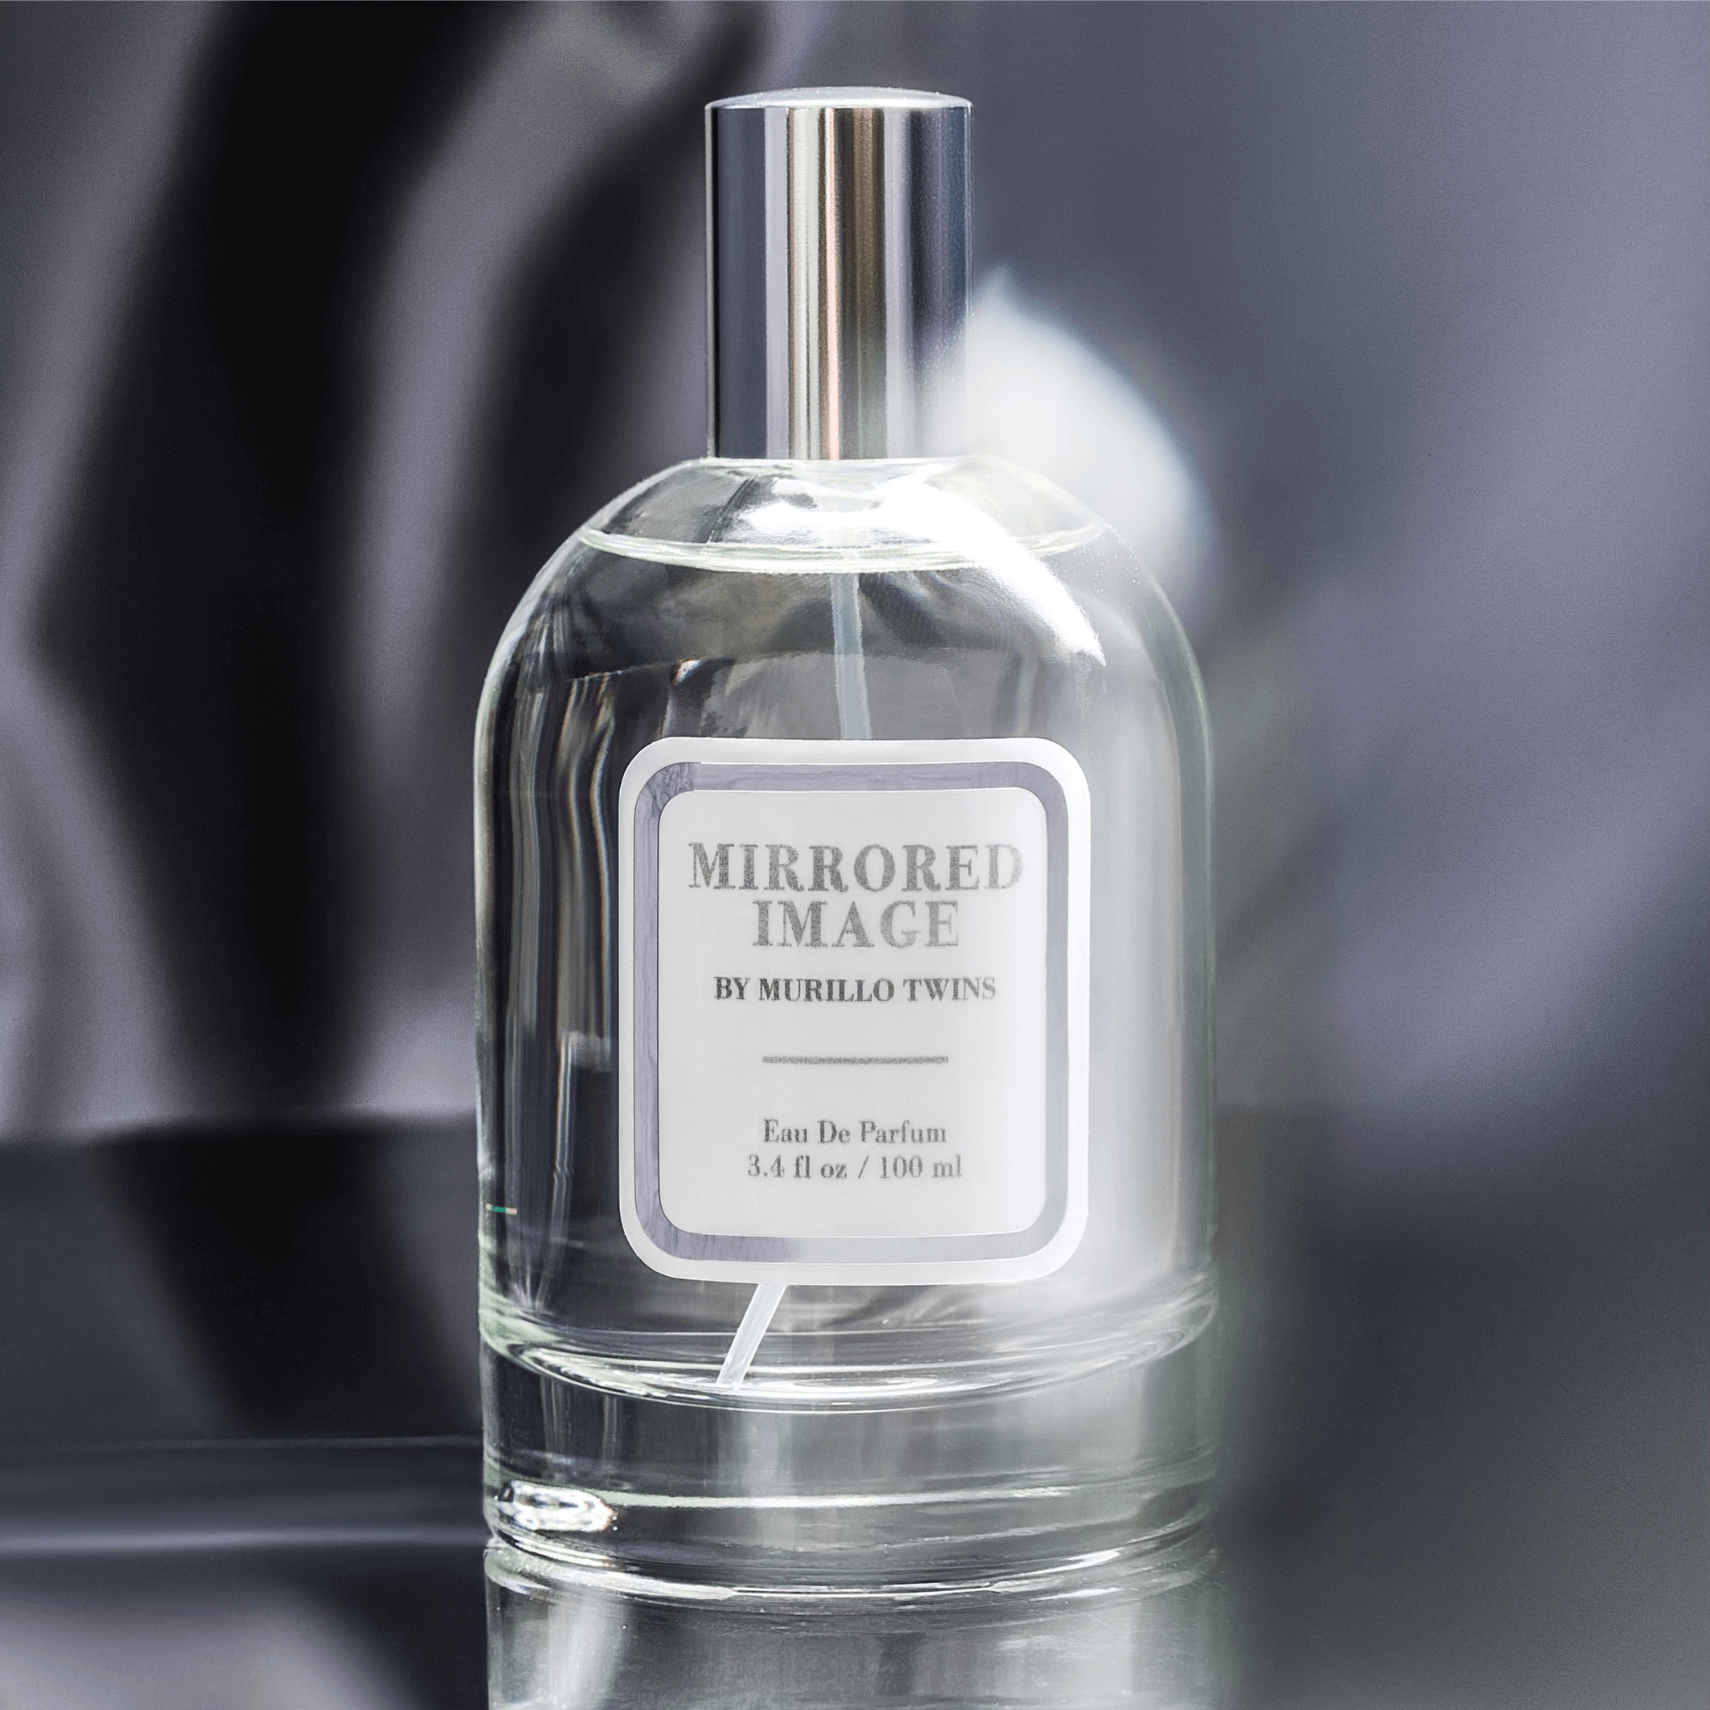 Mirrored Image fragrance by celebrity sisters, Briana and Brittany Murillo, displayed in a mysterious, moody setting.